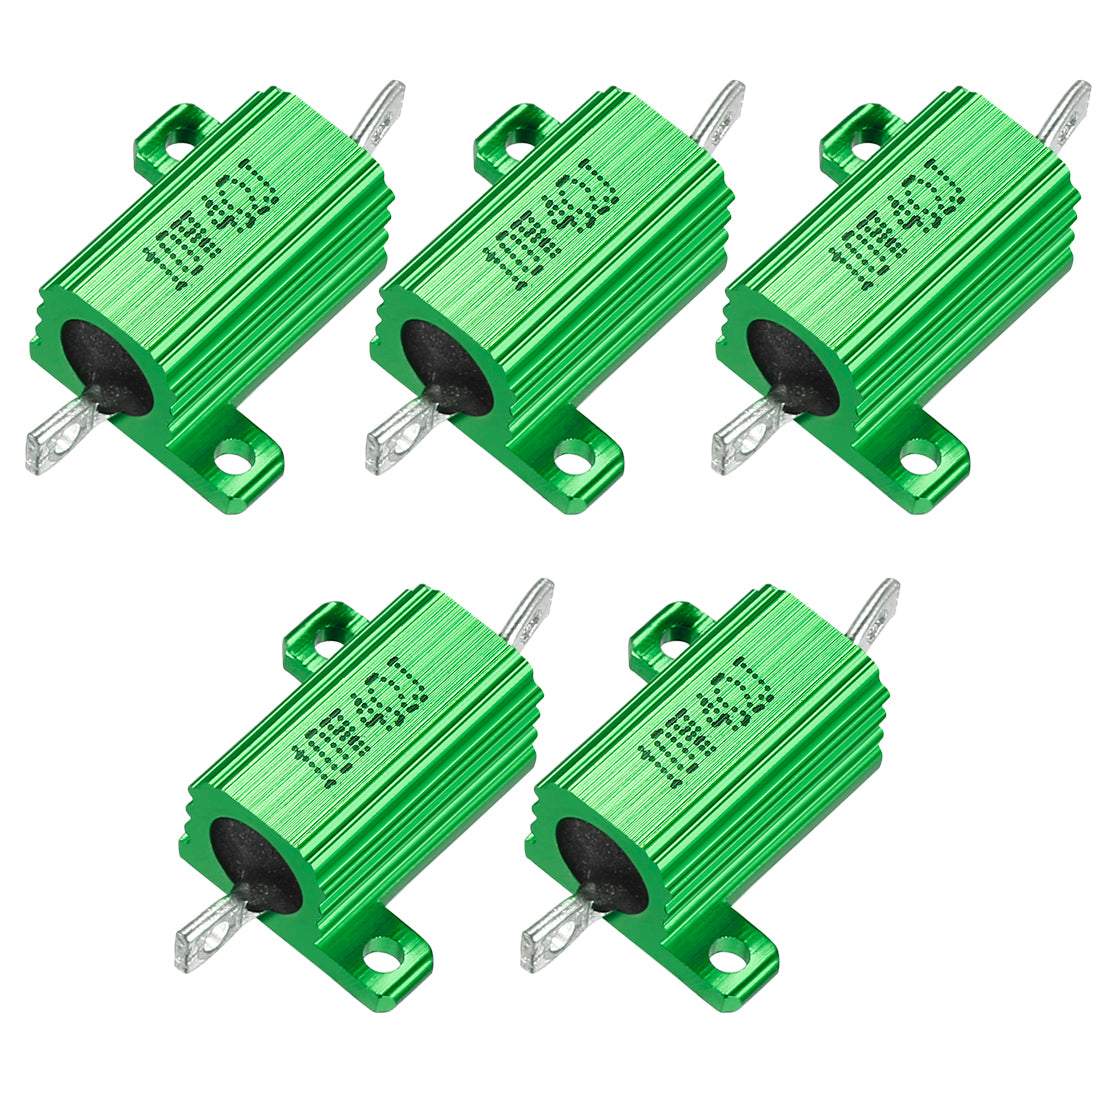 uxcell Uxcell Aluminum Case Resistor 10W 4 Ohm Green Wirewound for LED Converter with Rod Post 10W4R, 5pcs